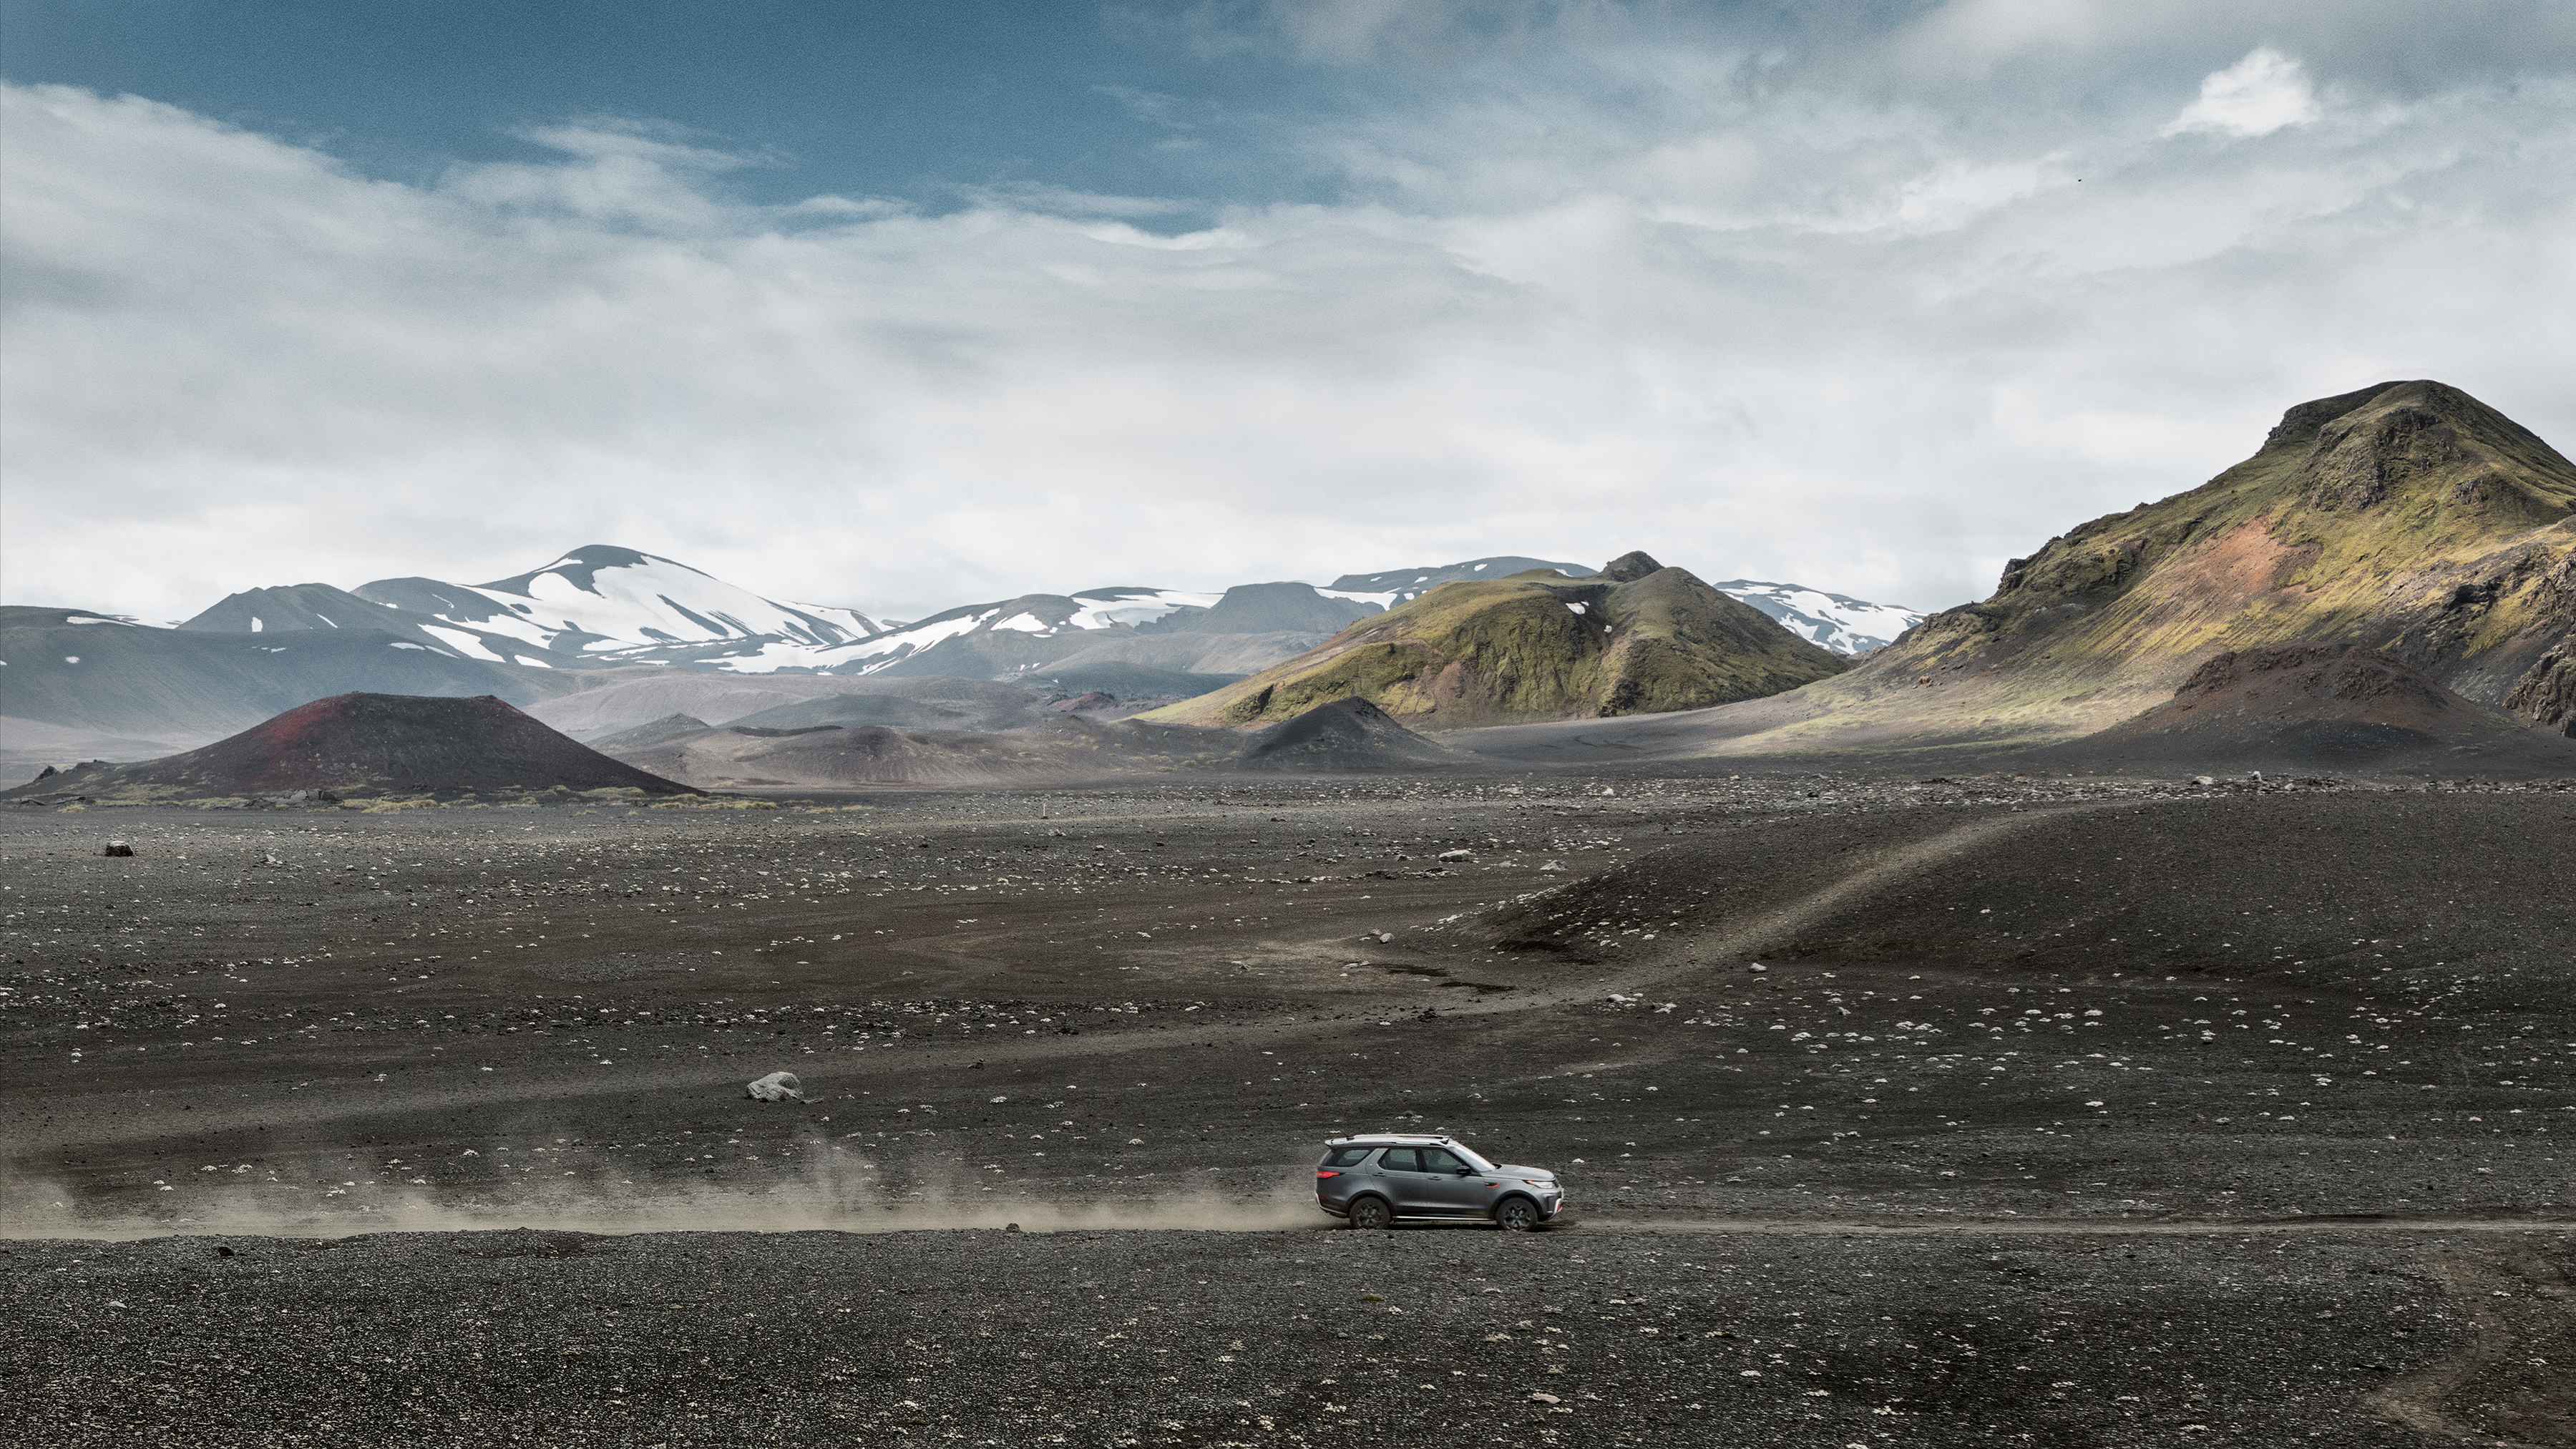 Trigger Shoots Land Rover Discovery Iceland photoshoot